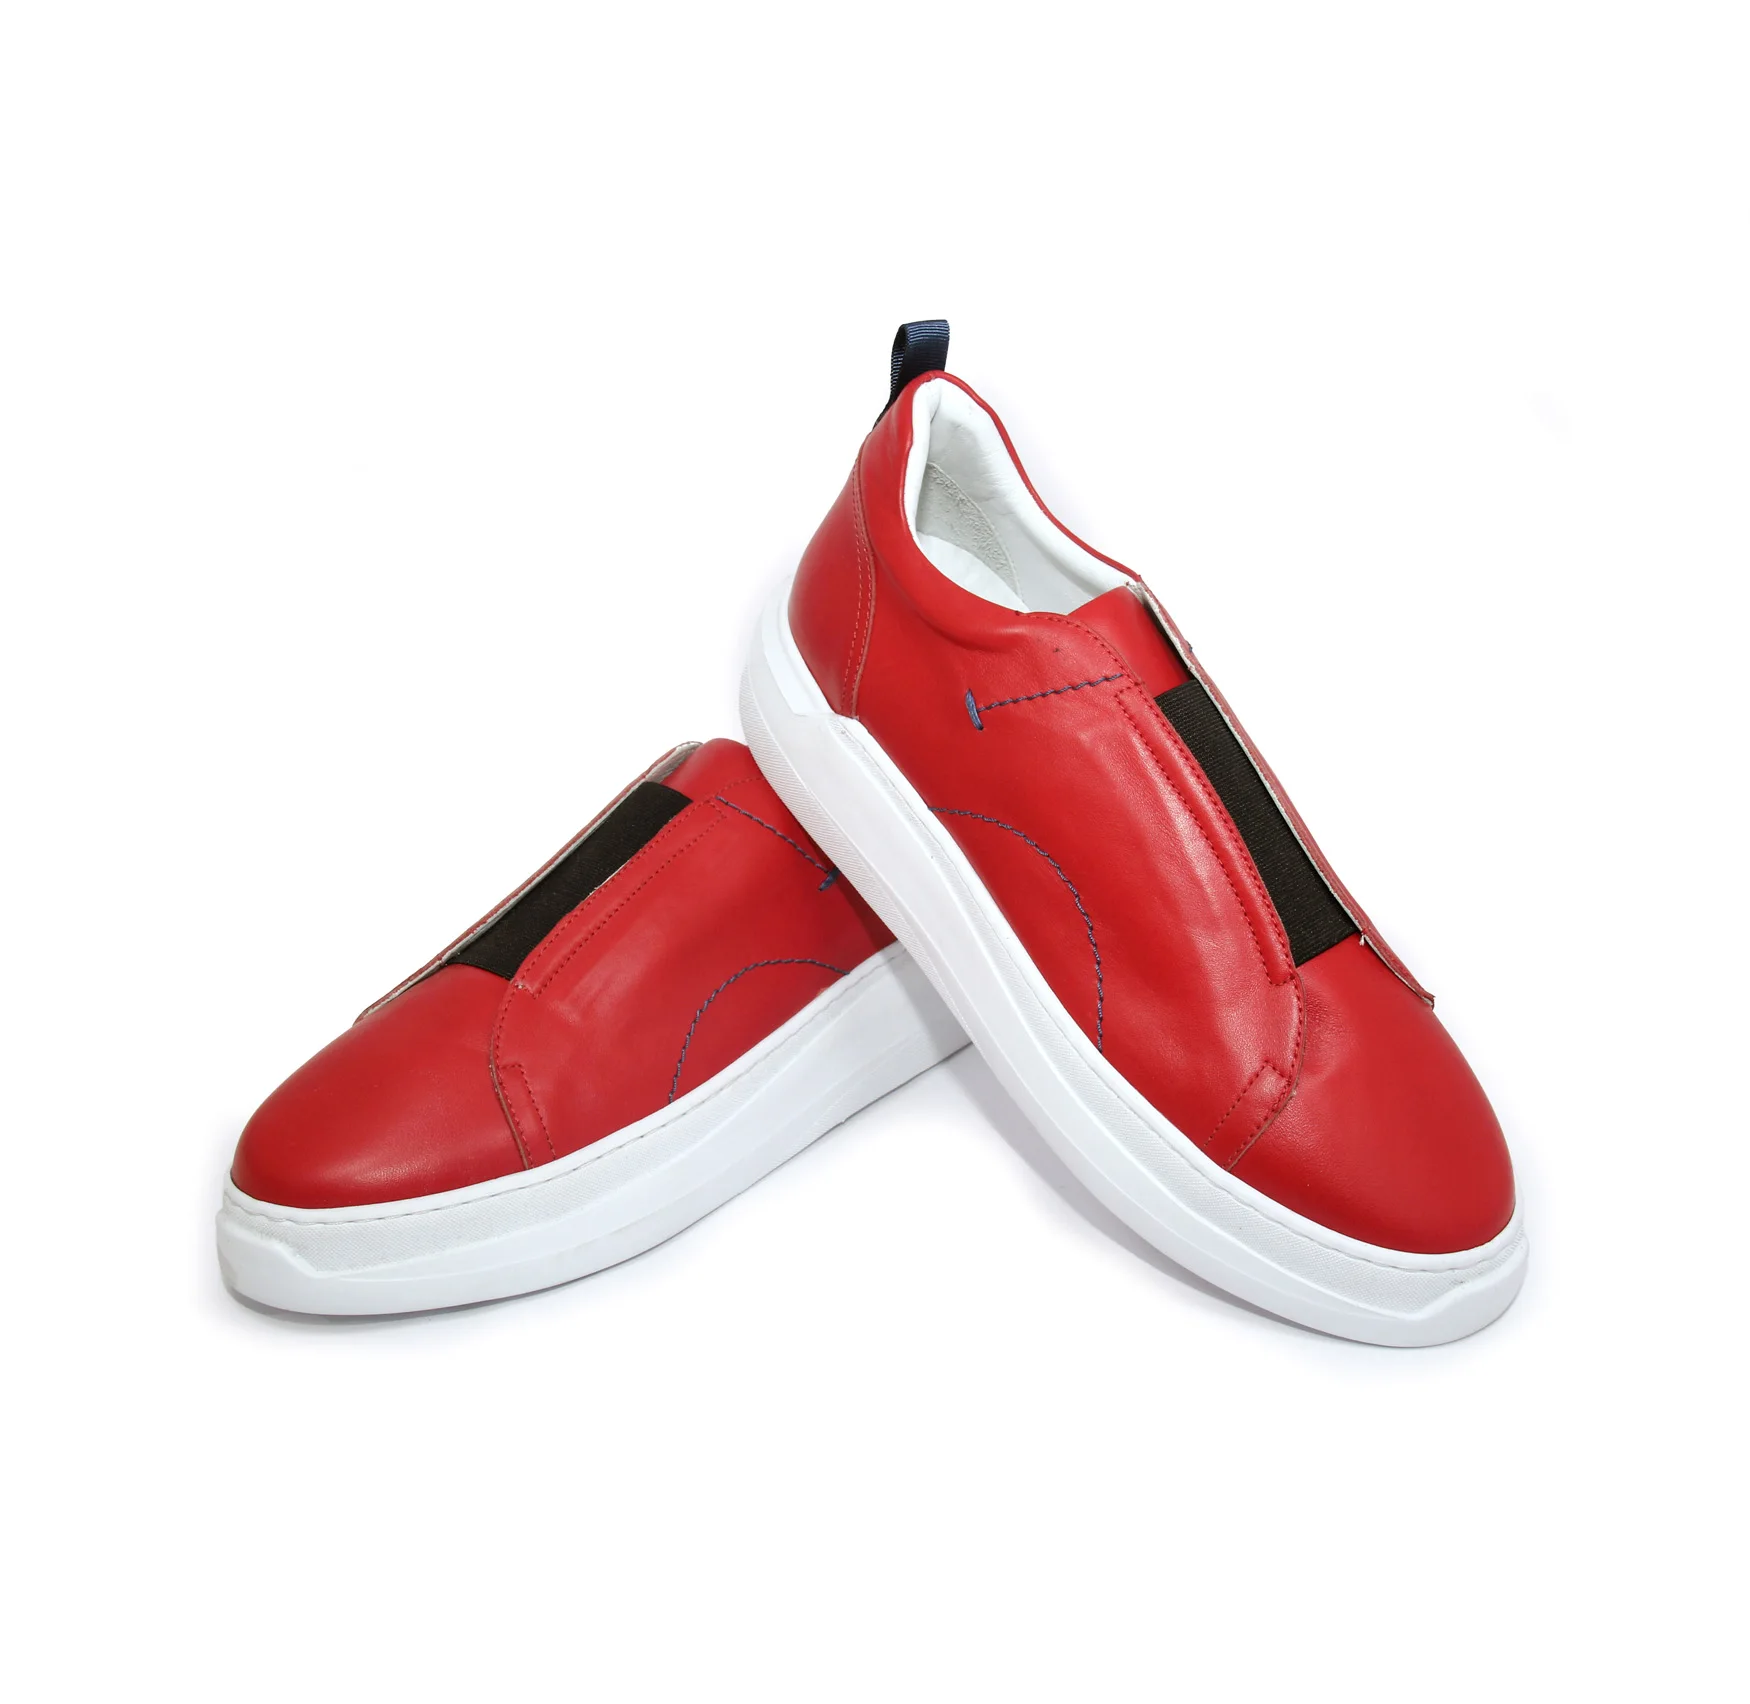 

Handmade Sport Slip On Laceless Sport Shoes with Real Calf Leather, Red White Black,Lightweight EVA Sole, Men's Comfort Sneakers